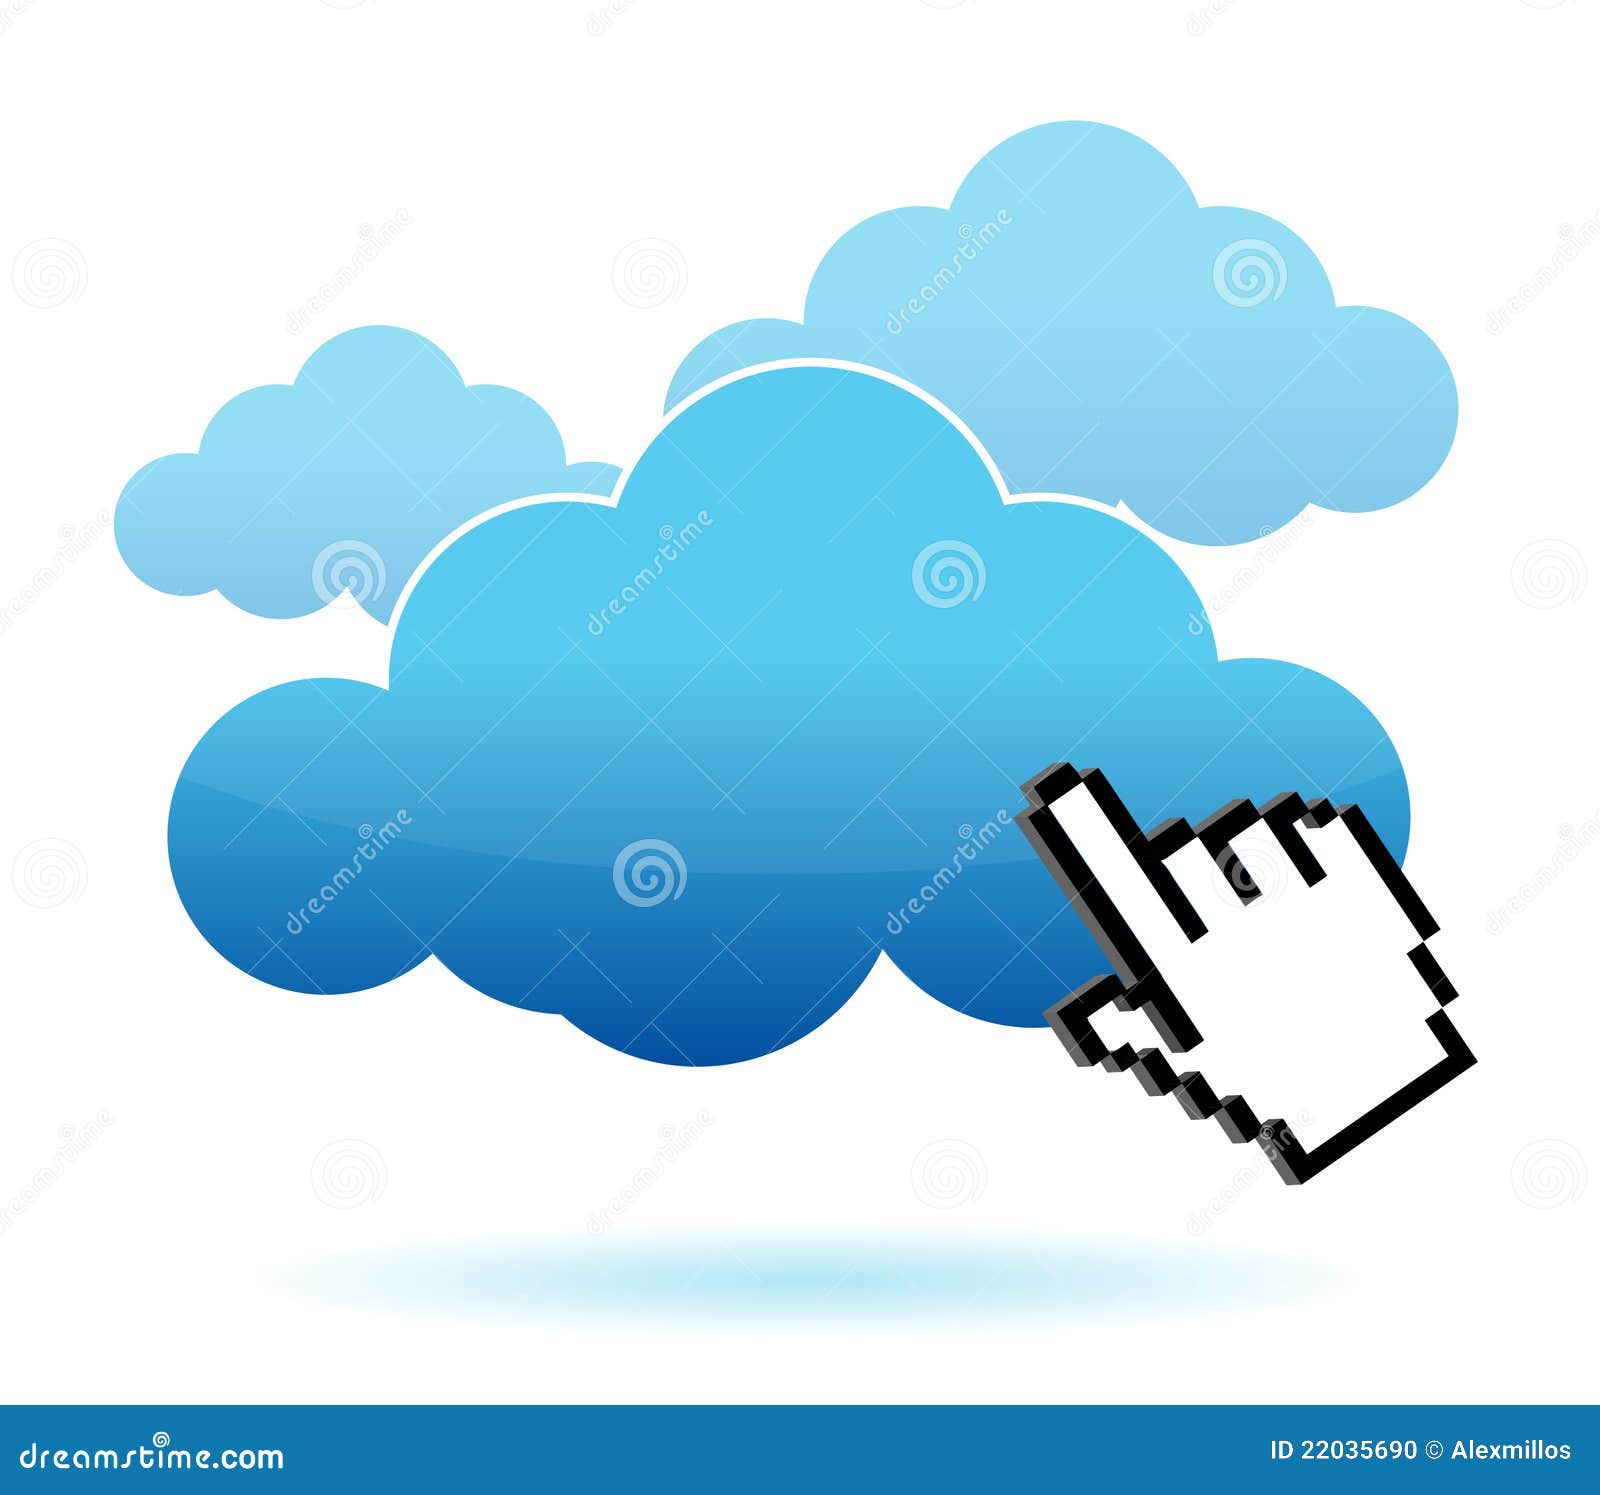 cursor icon hand clicking on a cloud 